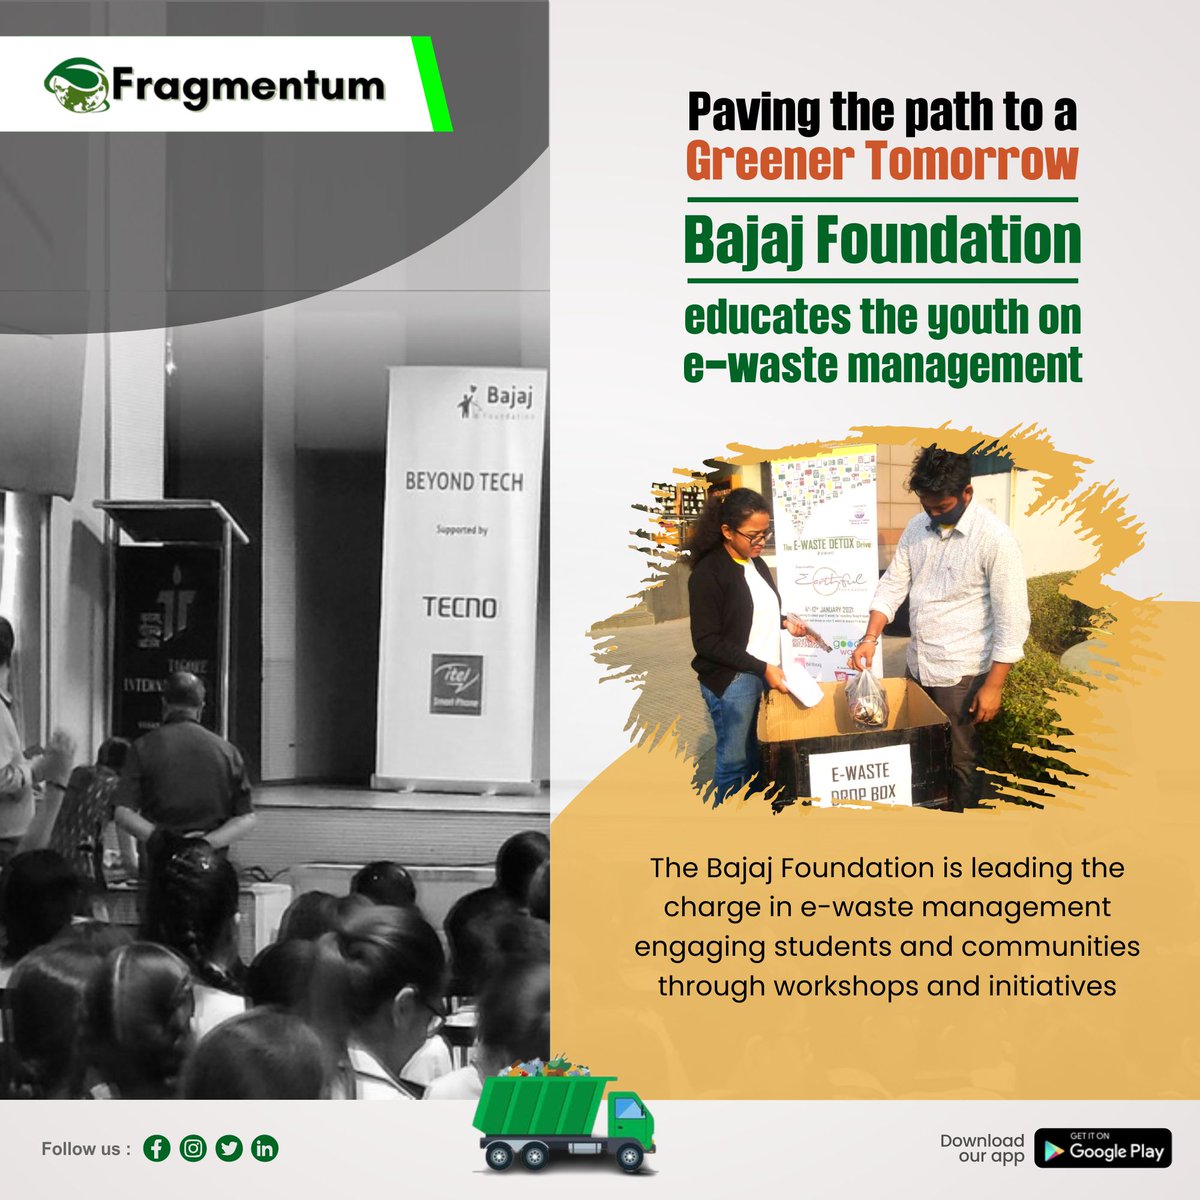 Bajaj Foundation is fighting e-waste with education!  Teaching students and communities to handle electronic devices responsibly.
To Reach us -
Visit Website:- fragmentum.in

#Fragmentum #bajajfoundation #ewaste #bajaj #gogreen #electronicwaste #wastemanagement